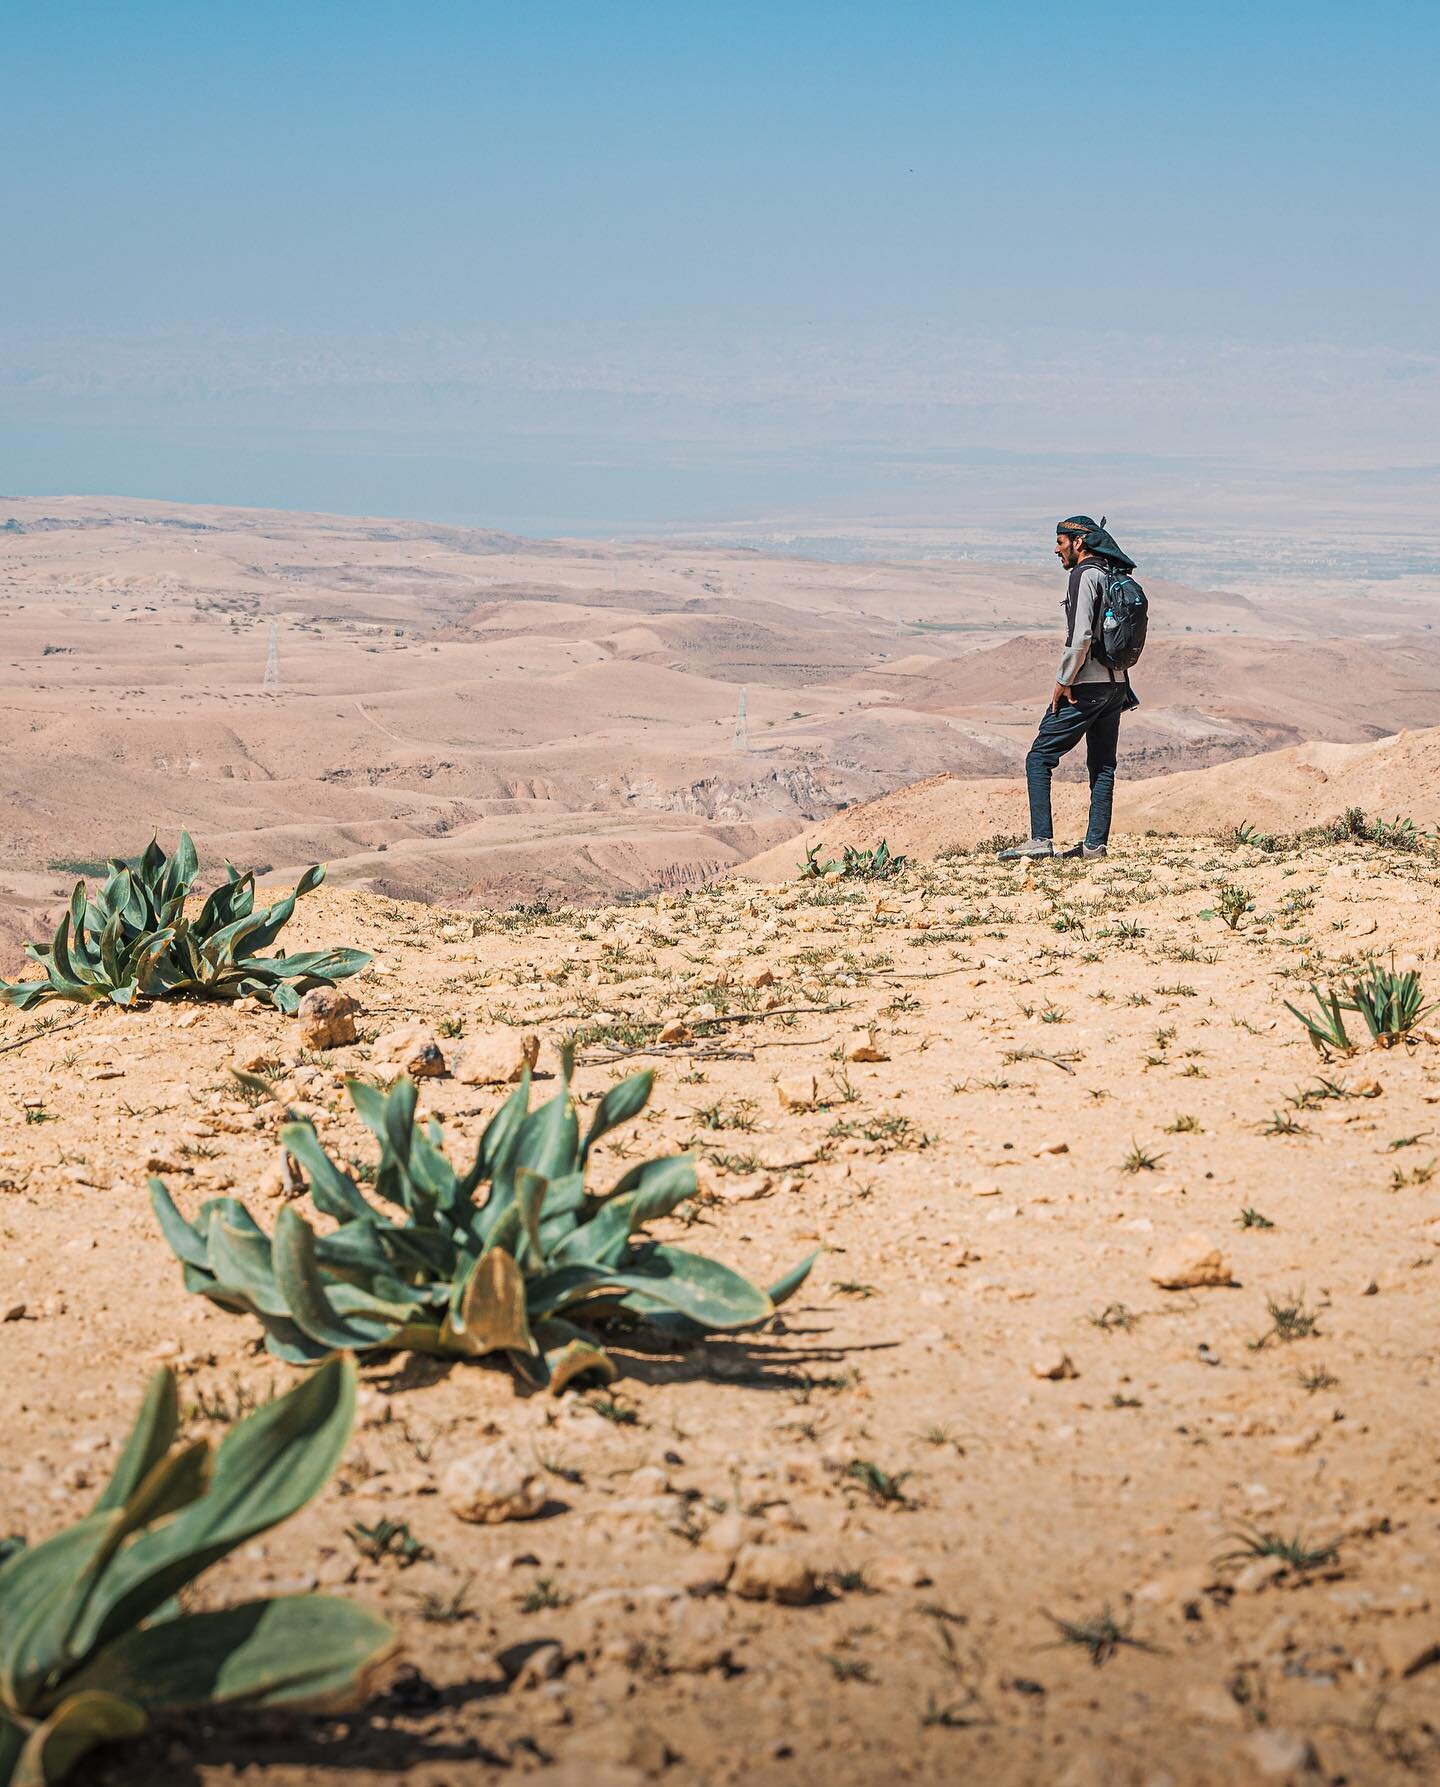 Alive mountains and dead seas...
👉 swipe for the full panoramic view and other photos from the hike
.
.
.
🖼 Scouting the Christian Pilgrimage Trail from Mount Nebo to the Baptism Site

📸 Captured on a personal outing with @bashirdaoud72 and @homra